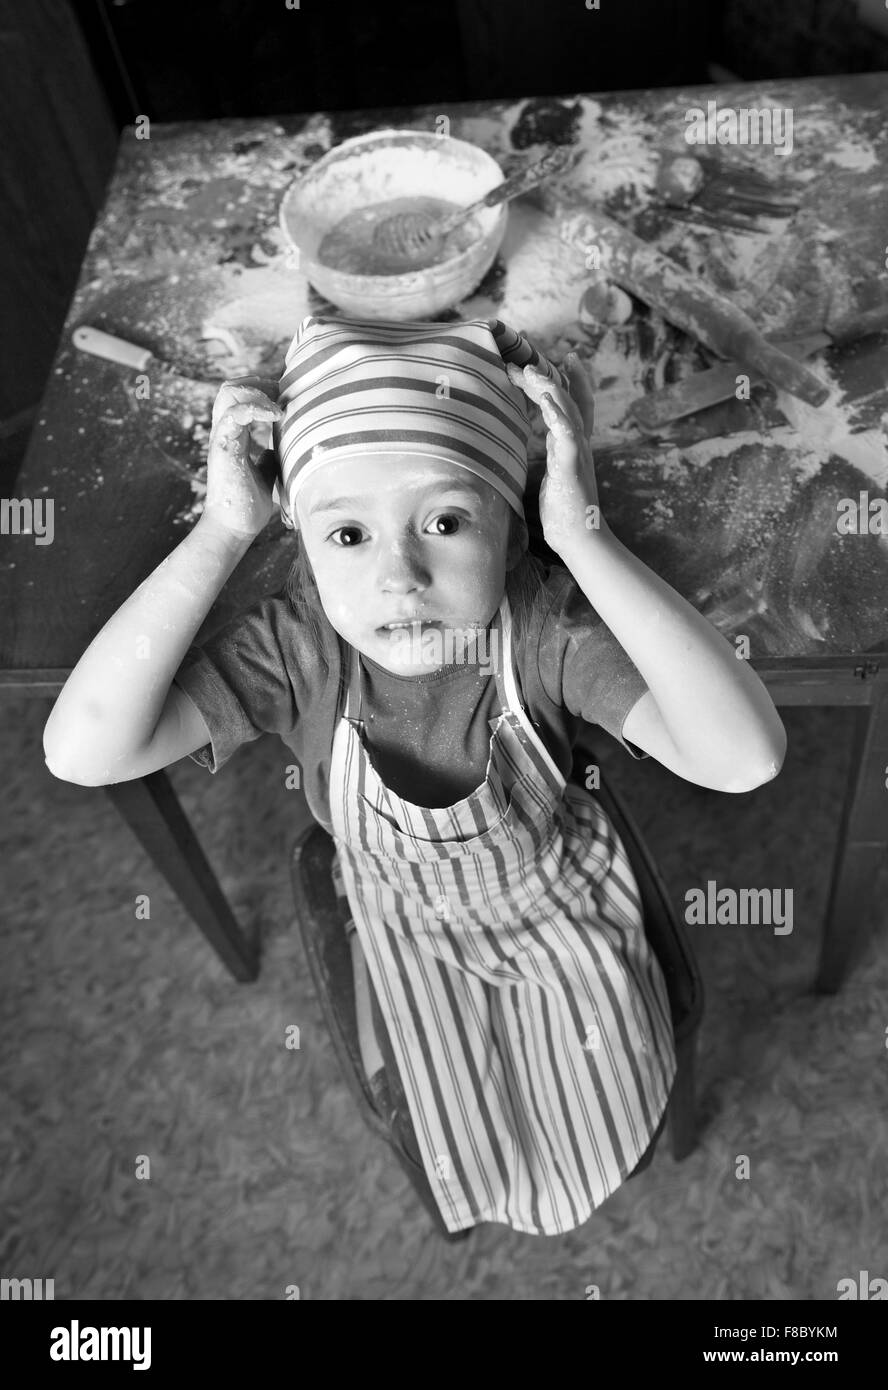 little chef in the kitchen wearing an apron and headscarf Stock Photo